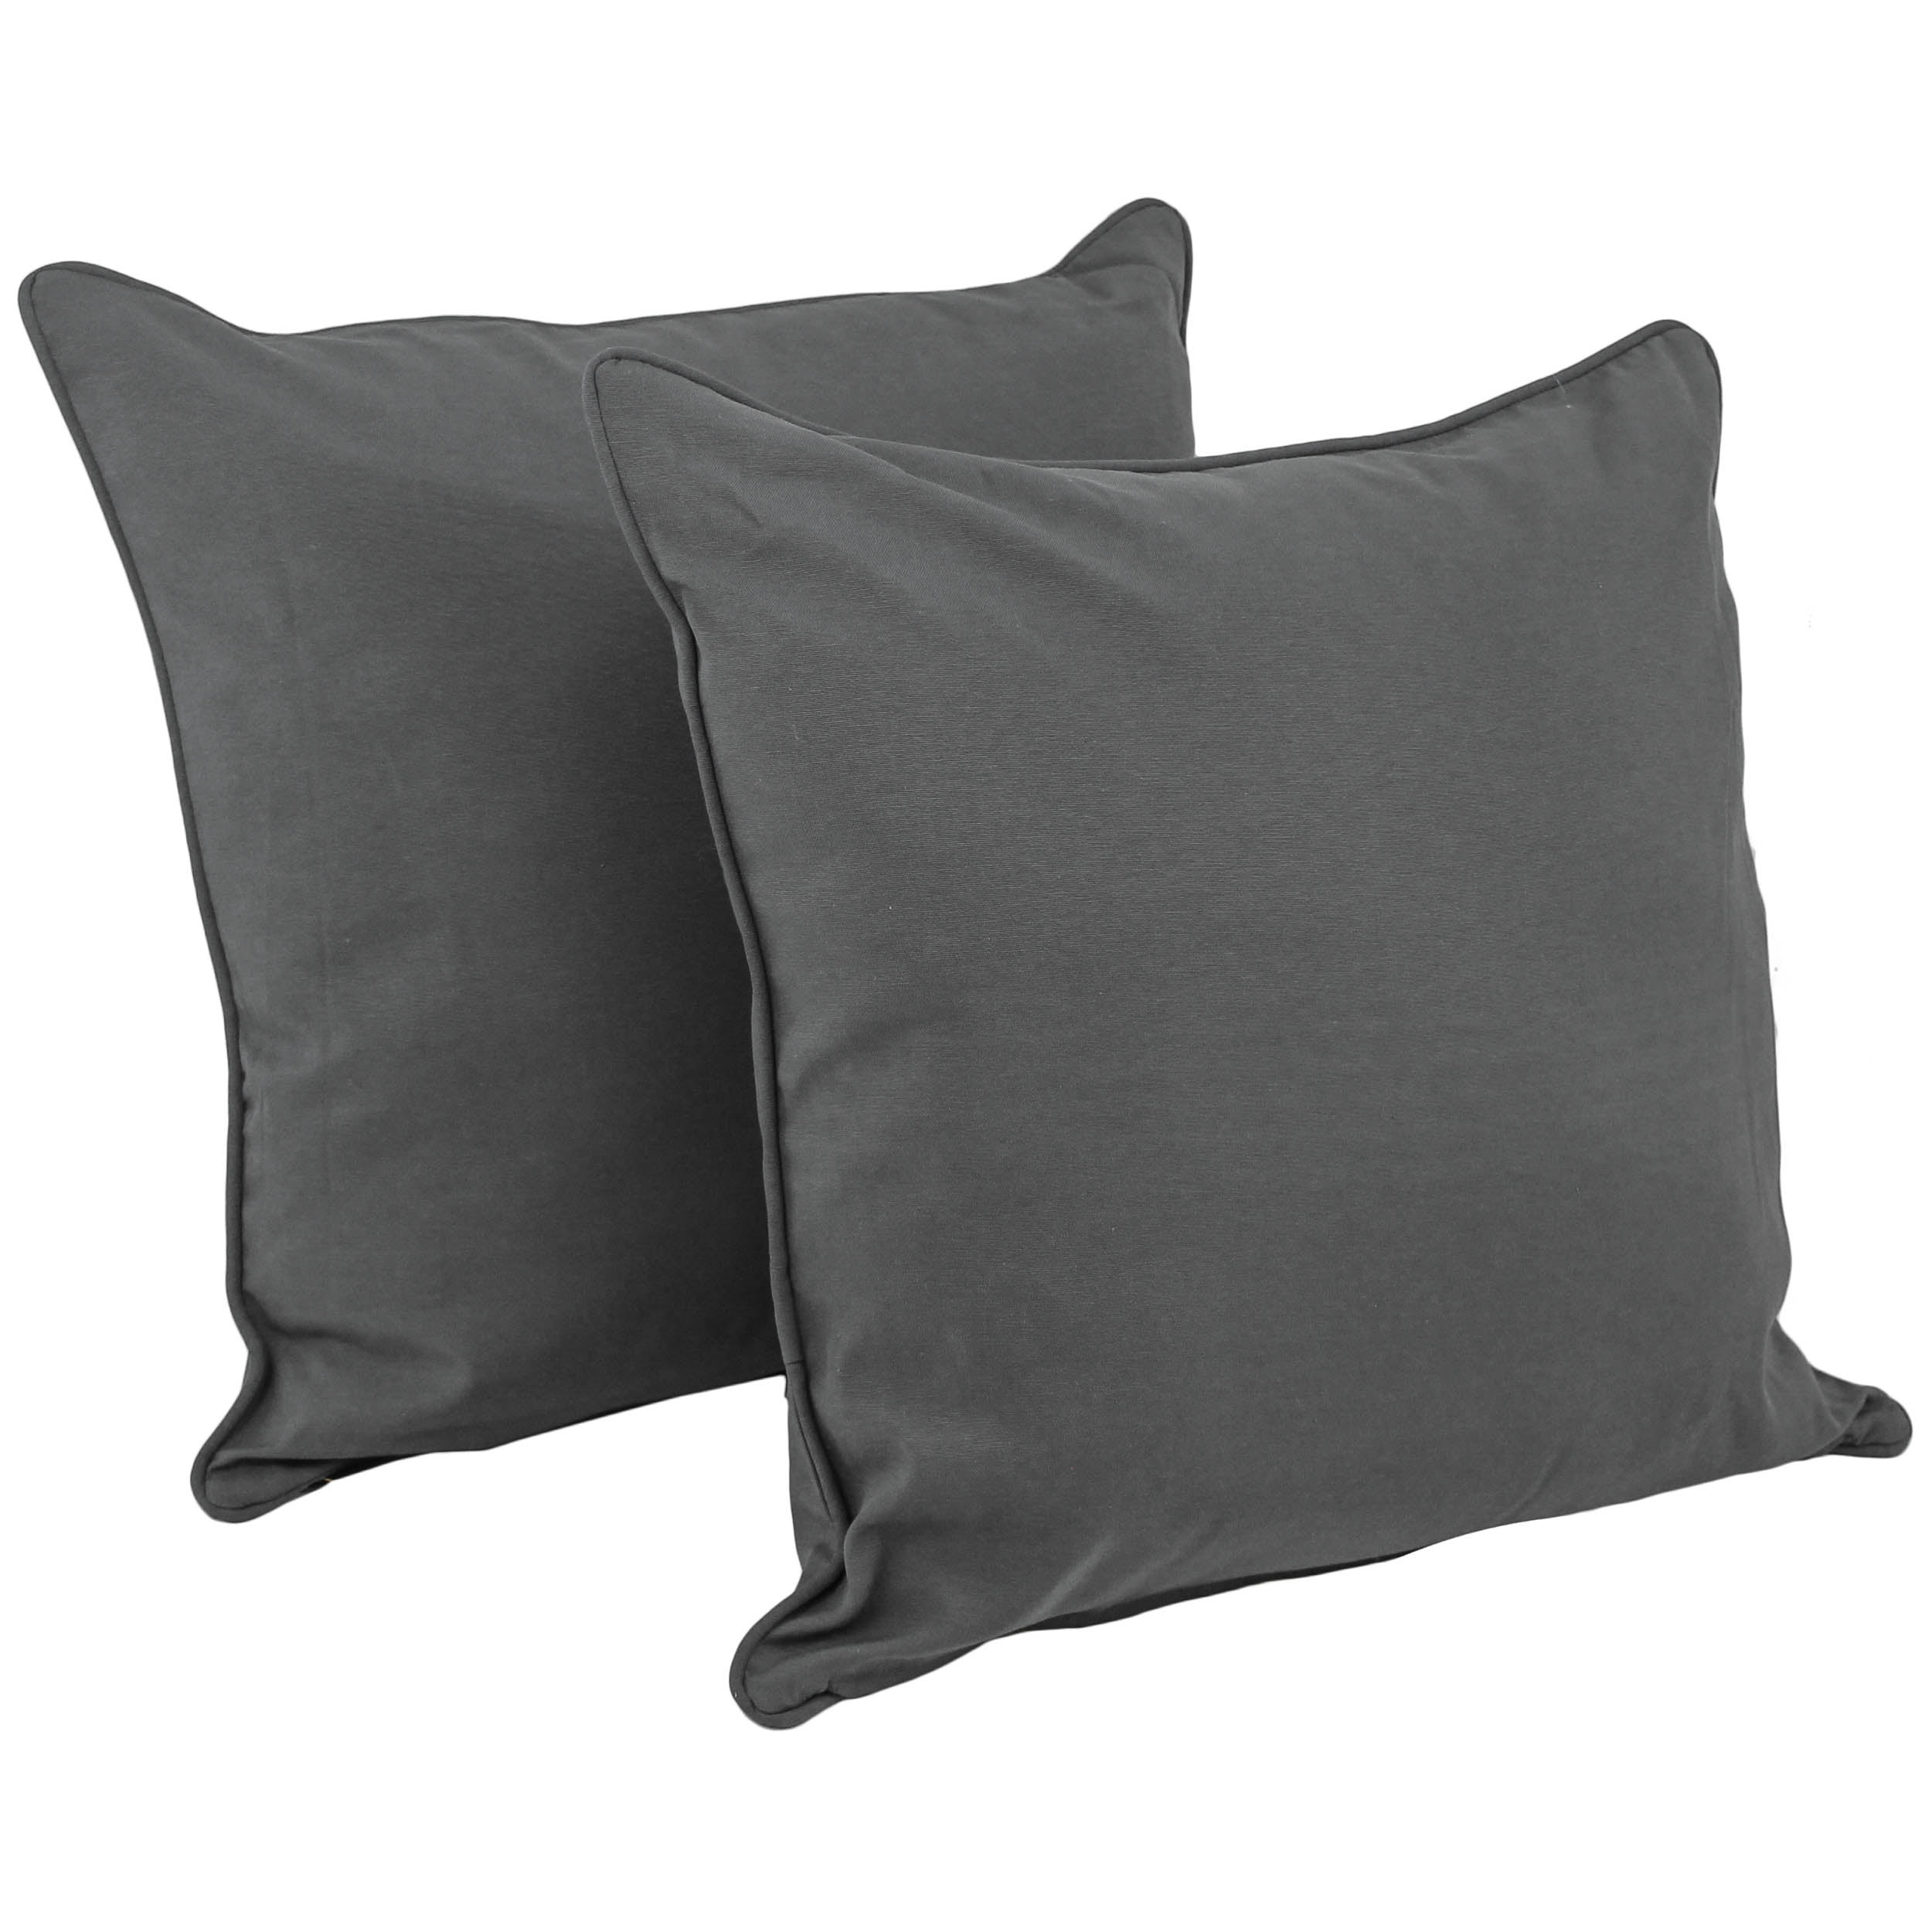 Picture of Blazing Needles 9813-CD-S2-TW-GY 25 in. Double-Corded Solid Twill Square Floor Pillows with Inserts, Steel Grey - Set of 2